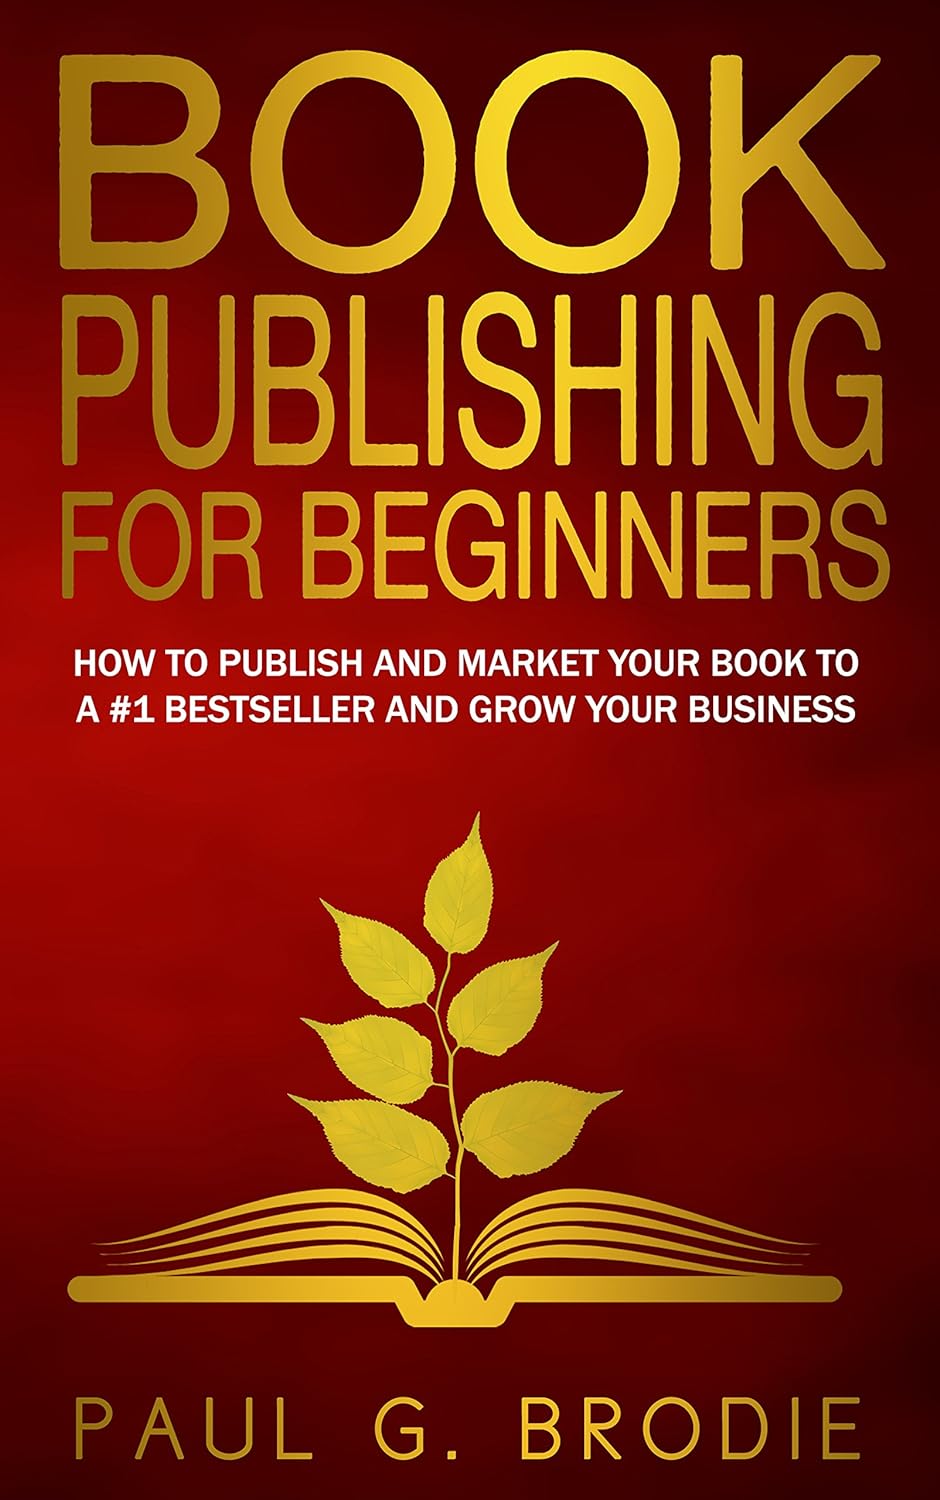 Book Publishing for Beginners How to Publish and Market Your Book to a #1 Bestseller